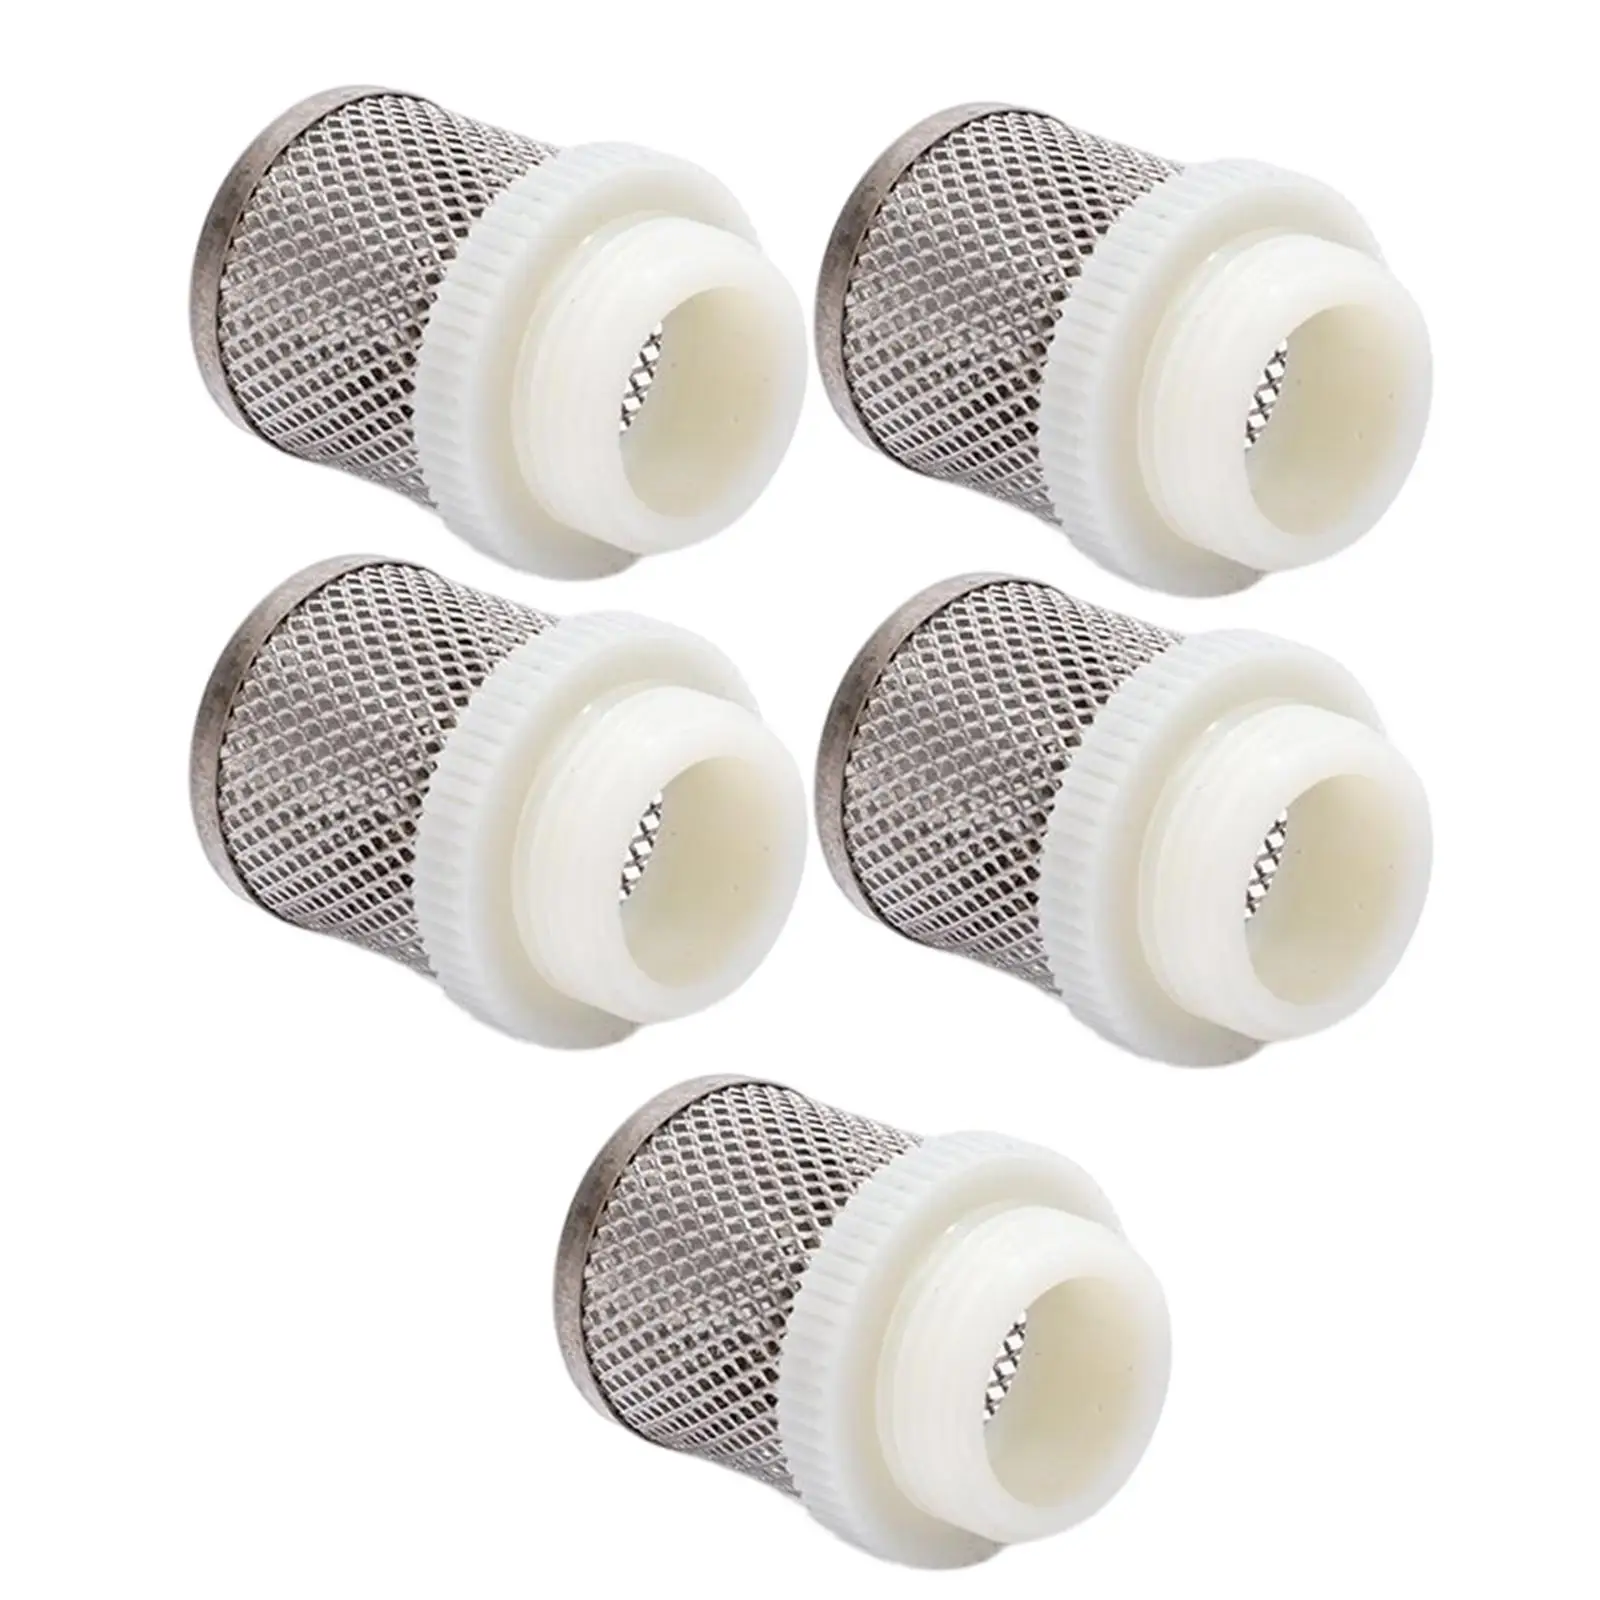 5x Multifunctional Hose Filter Stainless Steel Mesh Filter Accessories Replacements for Greenhouse Home Lawn Garden Farm